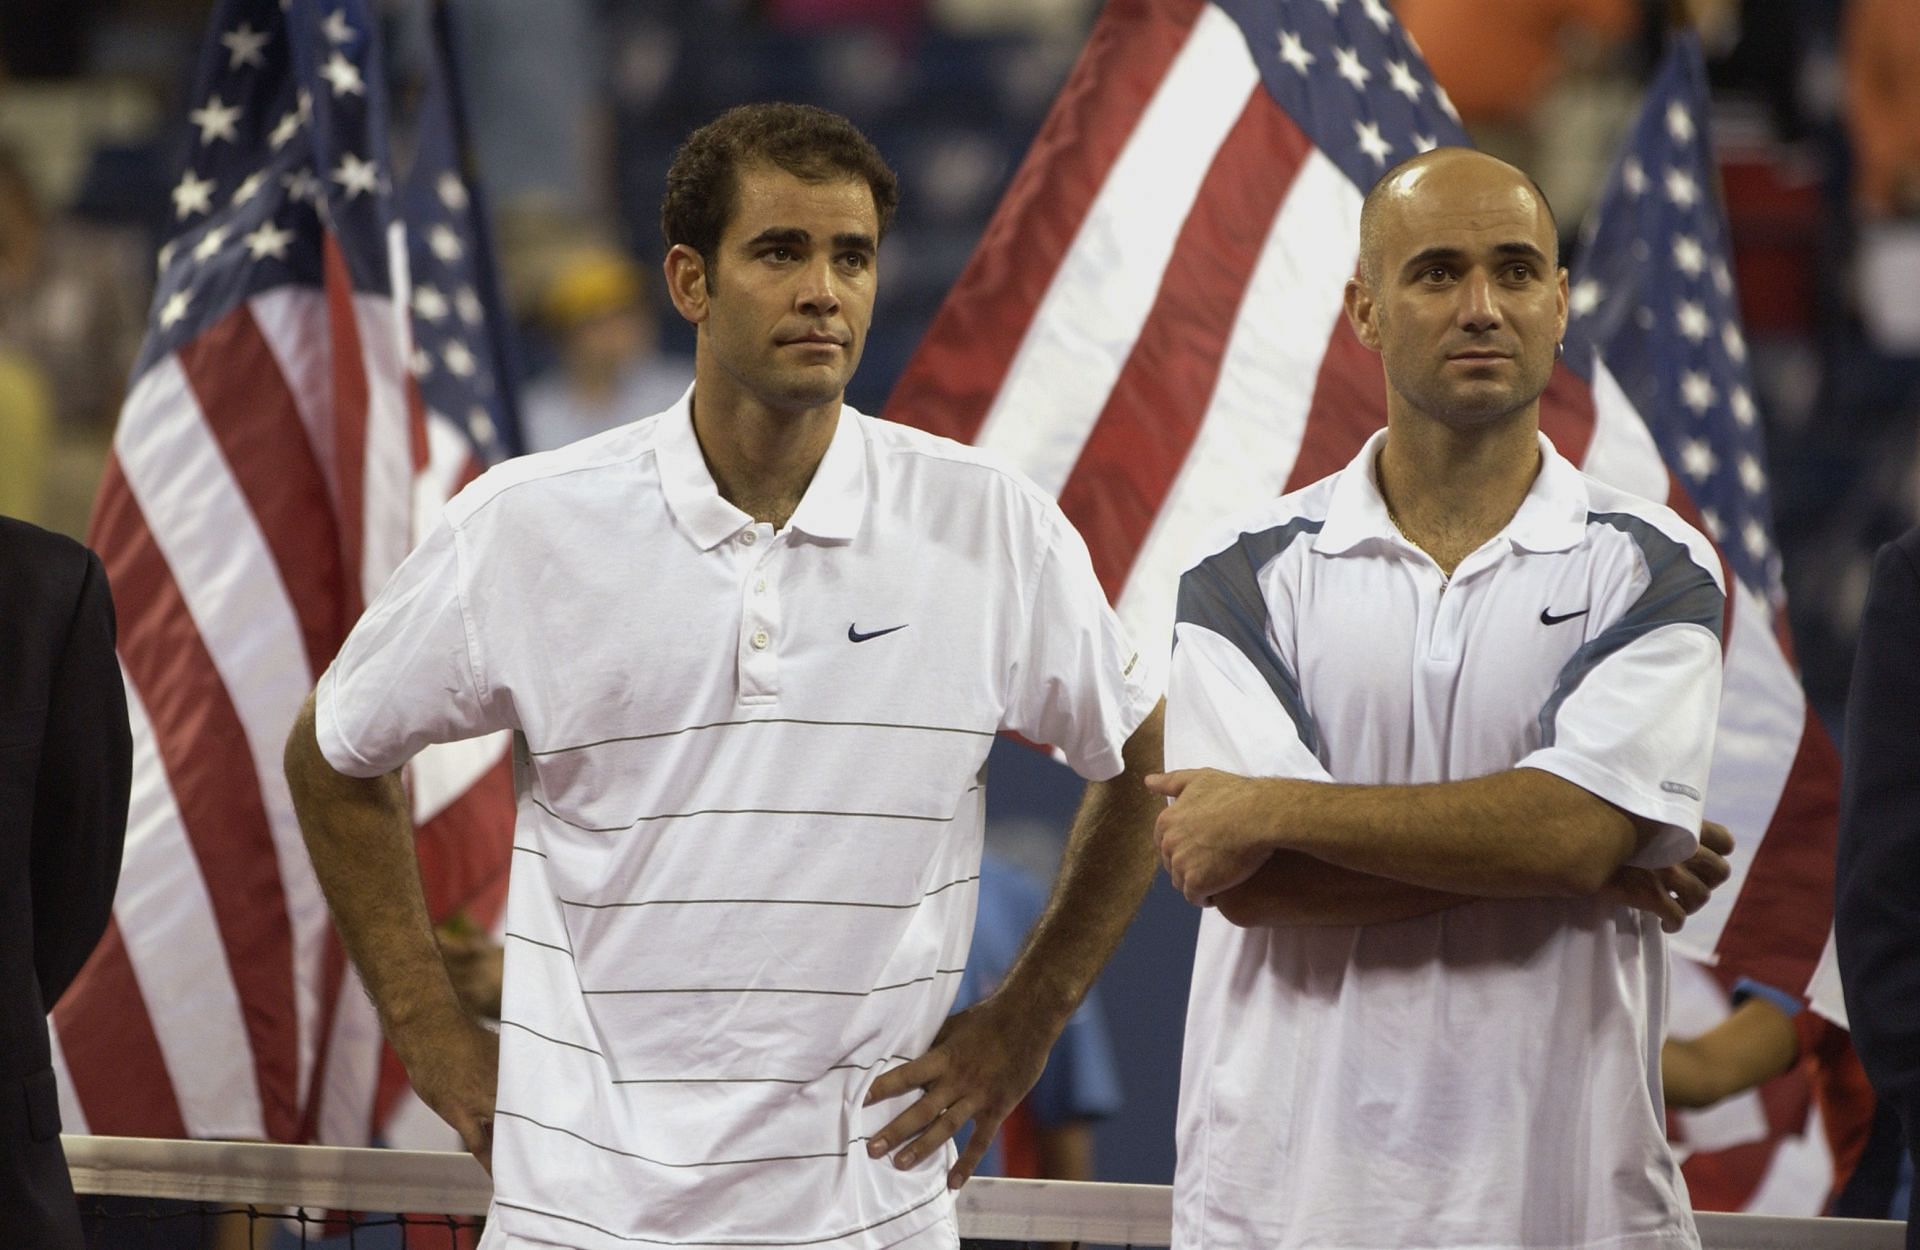 Pete Sampras beat Andre Agassi to win the 2002 US Open